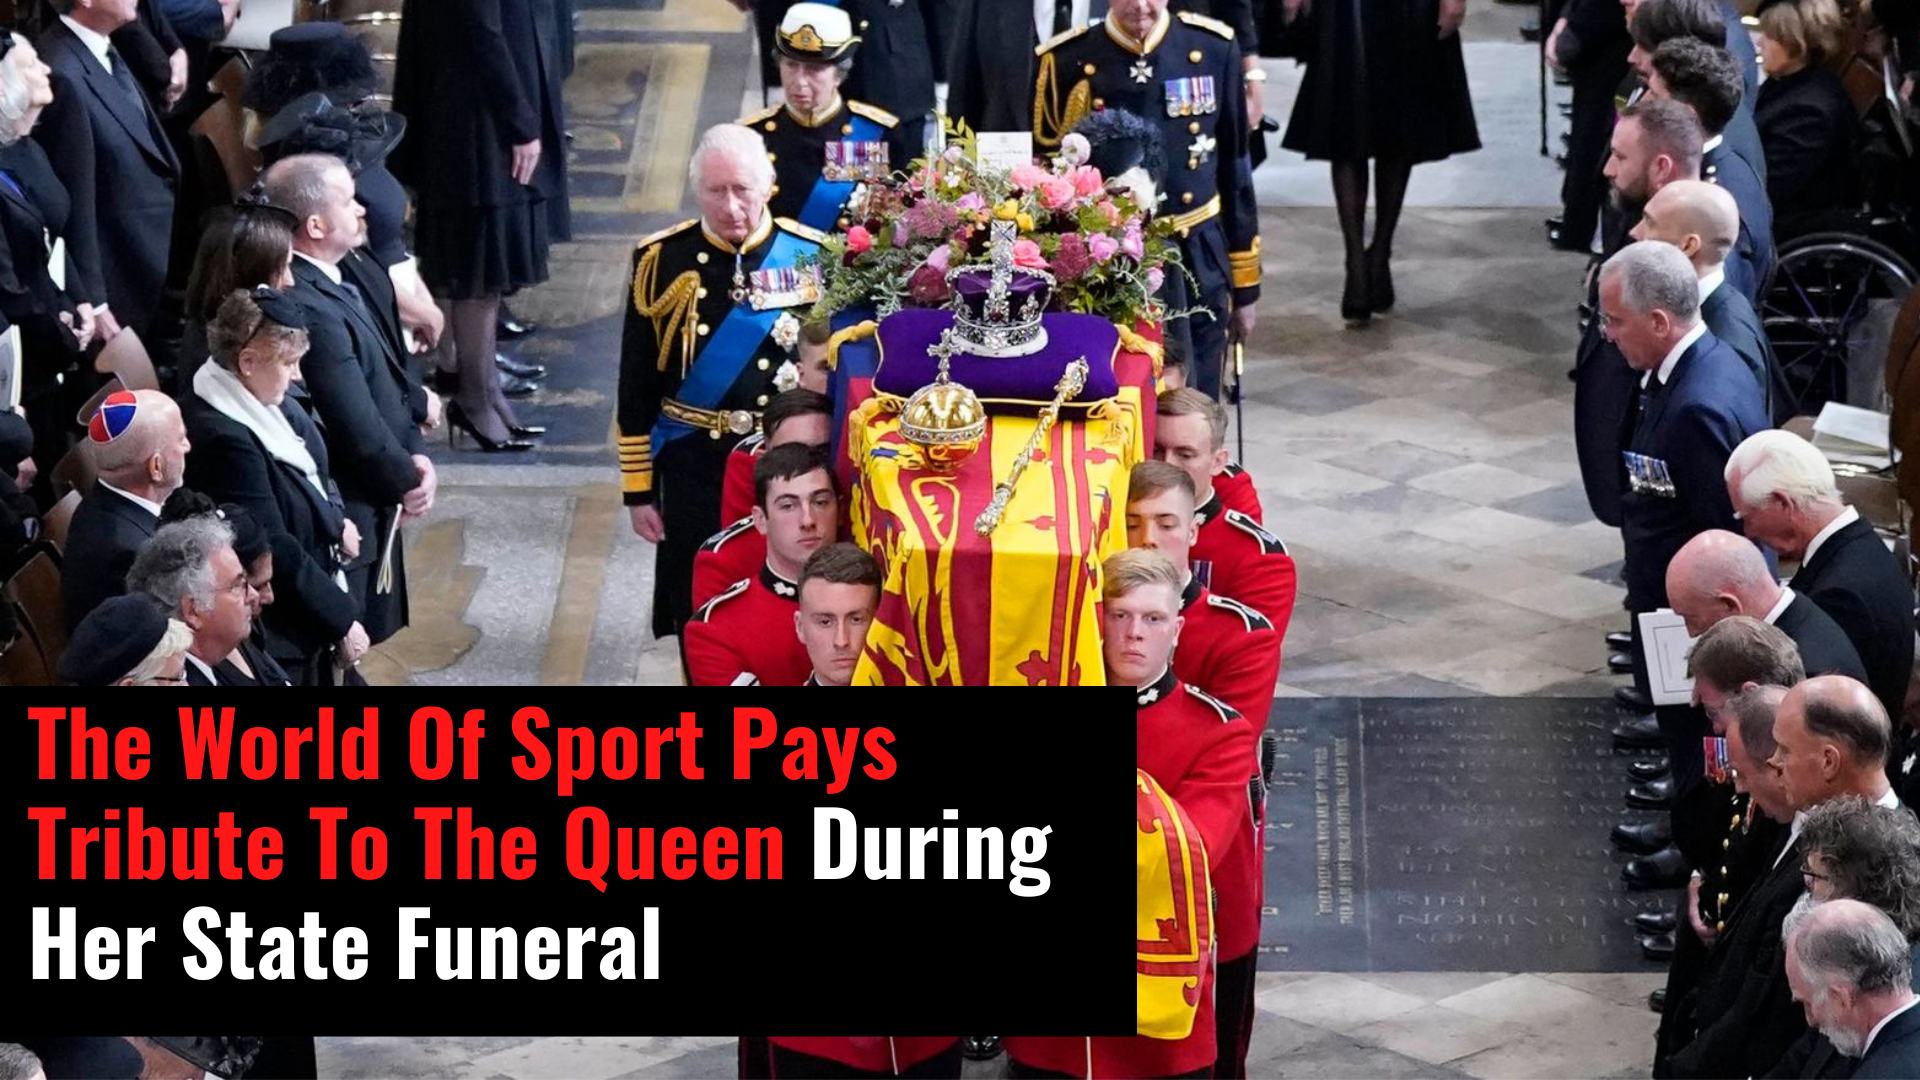 The World Of Sport Pays Tribute To The Queen During Her State Funeral